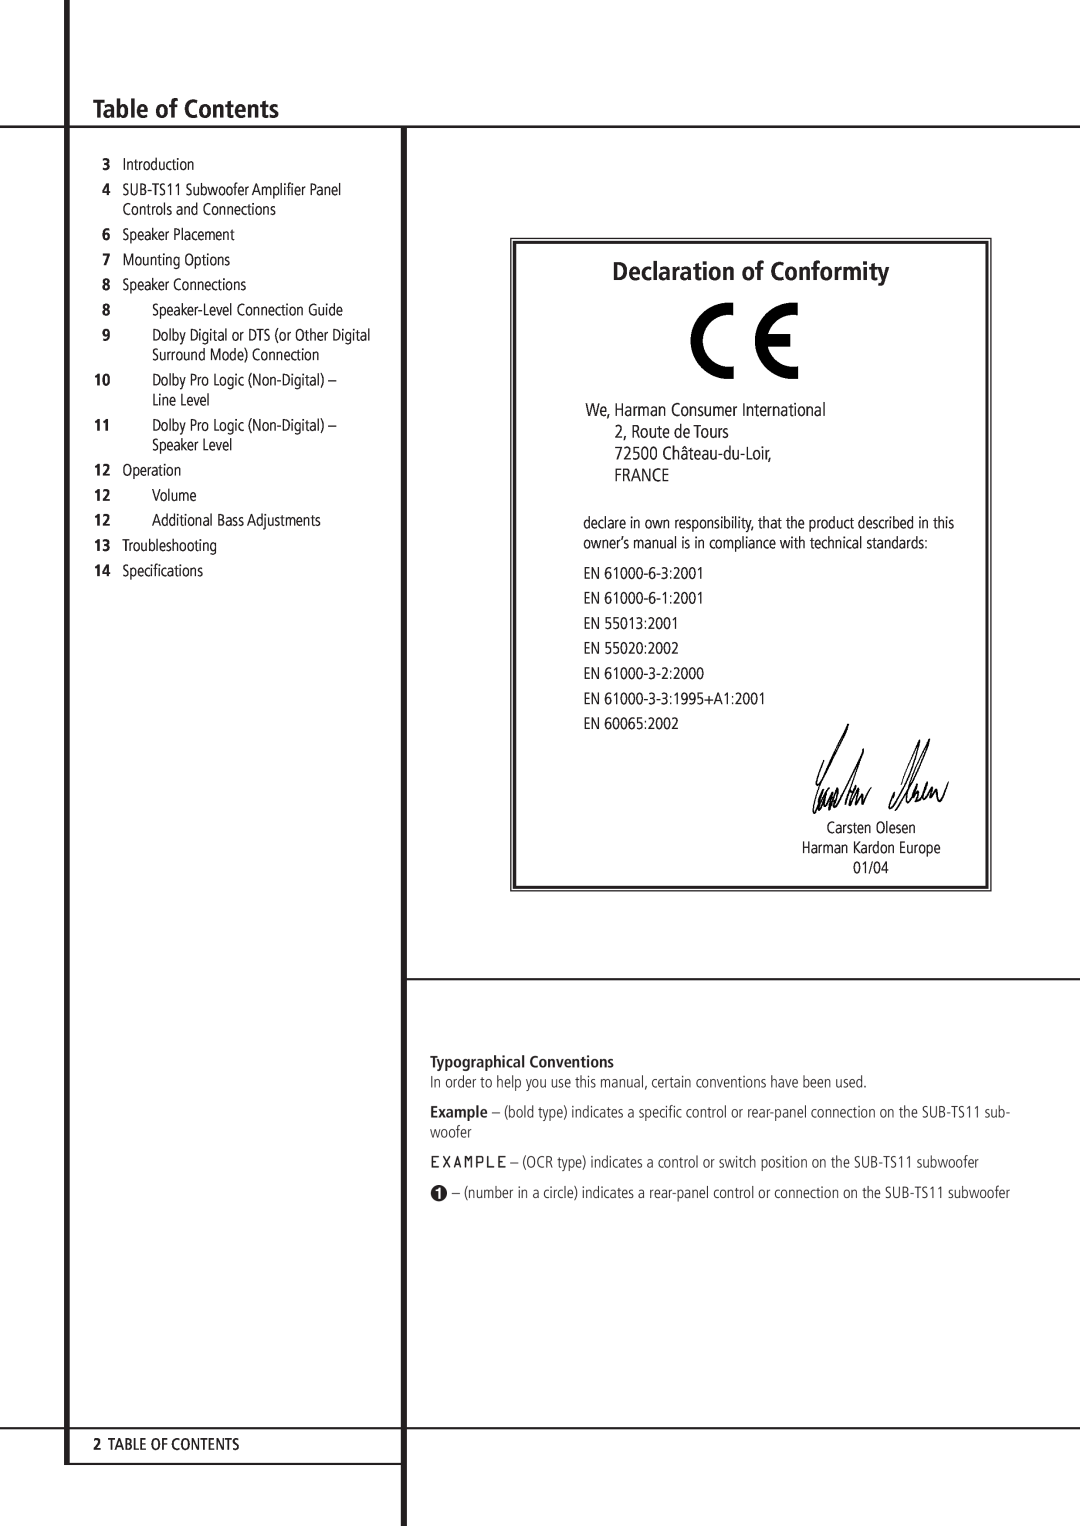 Harman-Kardon HKTS 11 owner manual Table of Contents, Declaration of Conformity, Typographical Conventions 